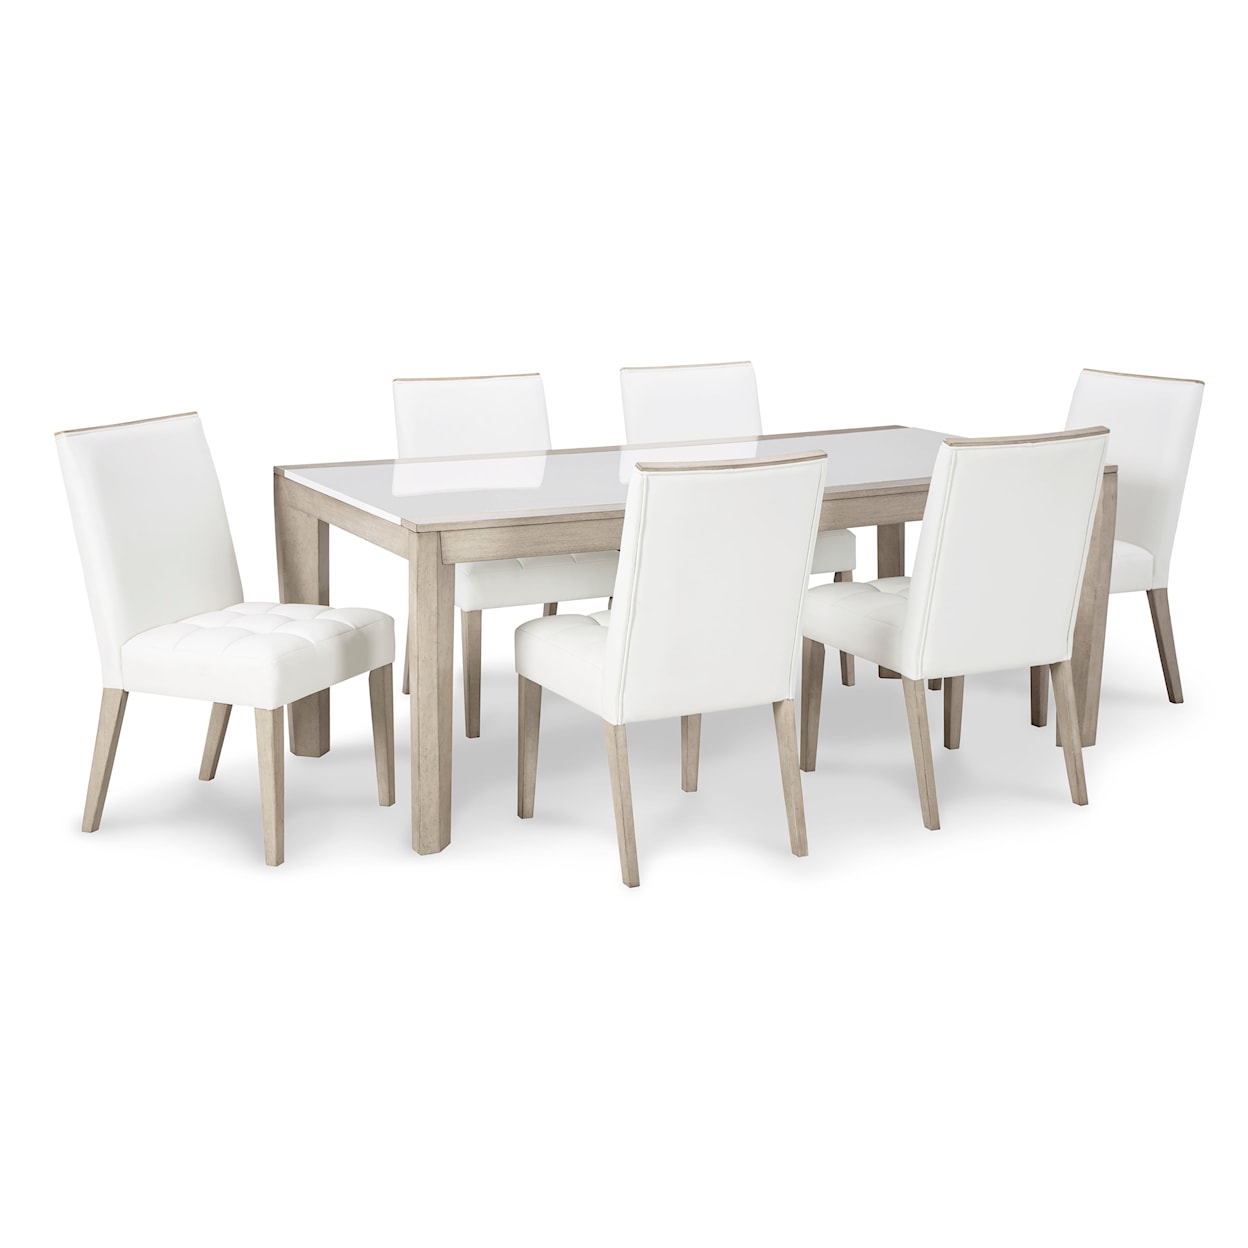 Benchcraft Wendora Table and 6 Chair Dining Set